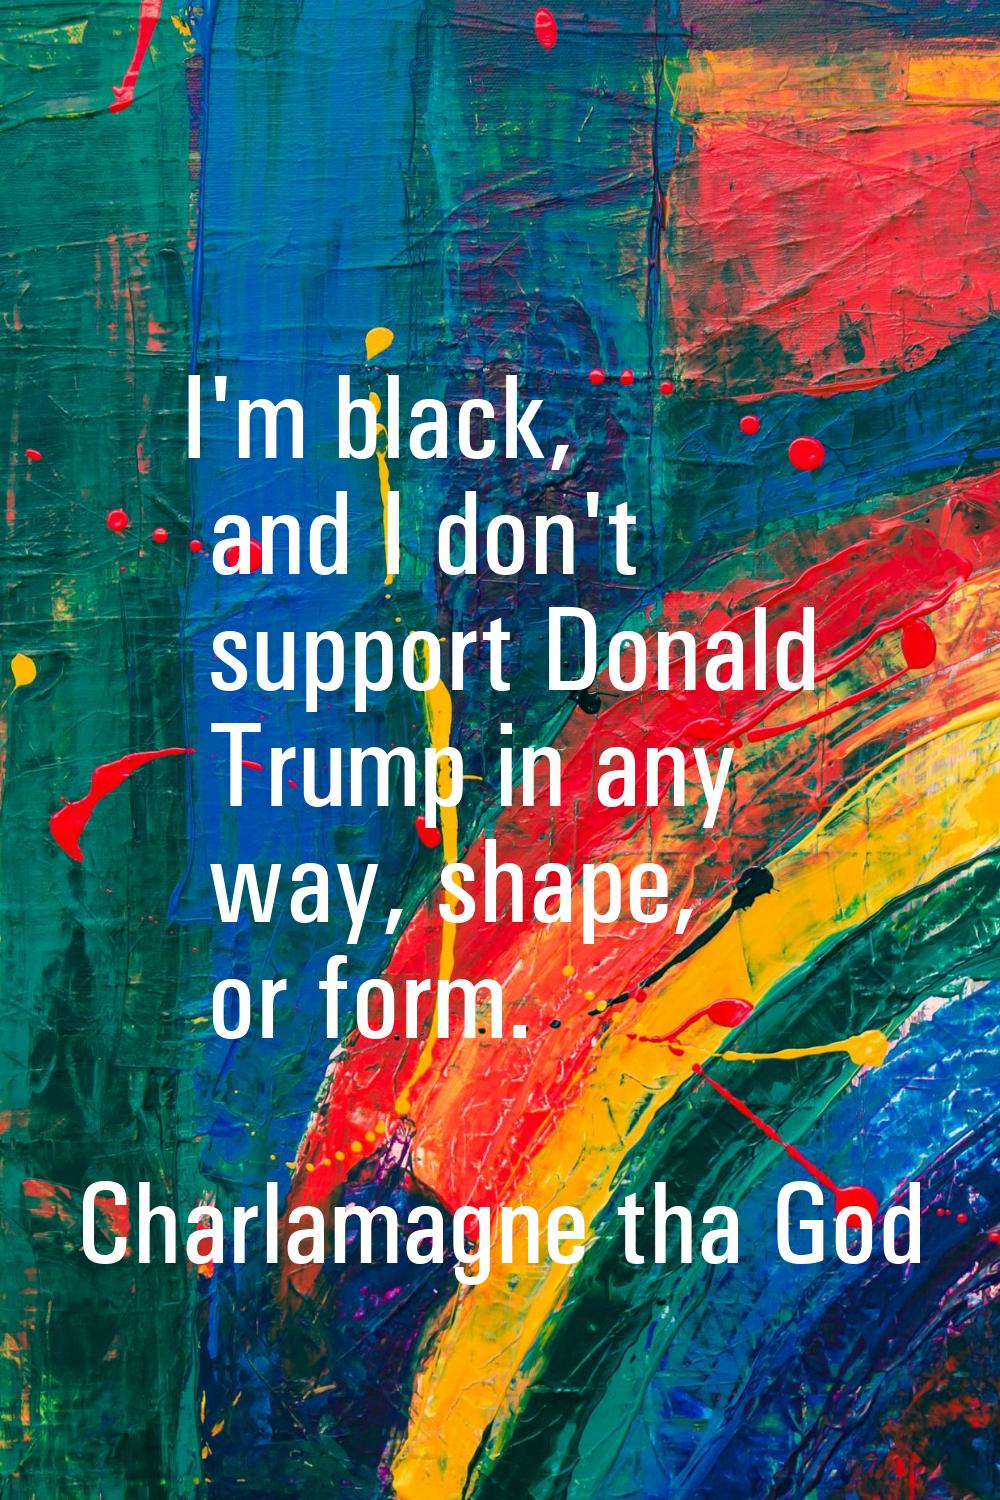 I'm black, and I don't support Donald Trump in any way, shape, or form.